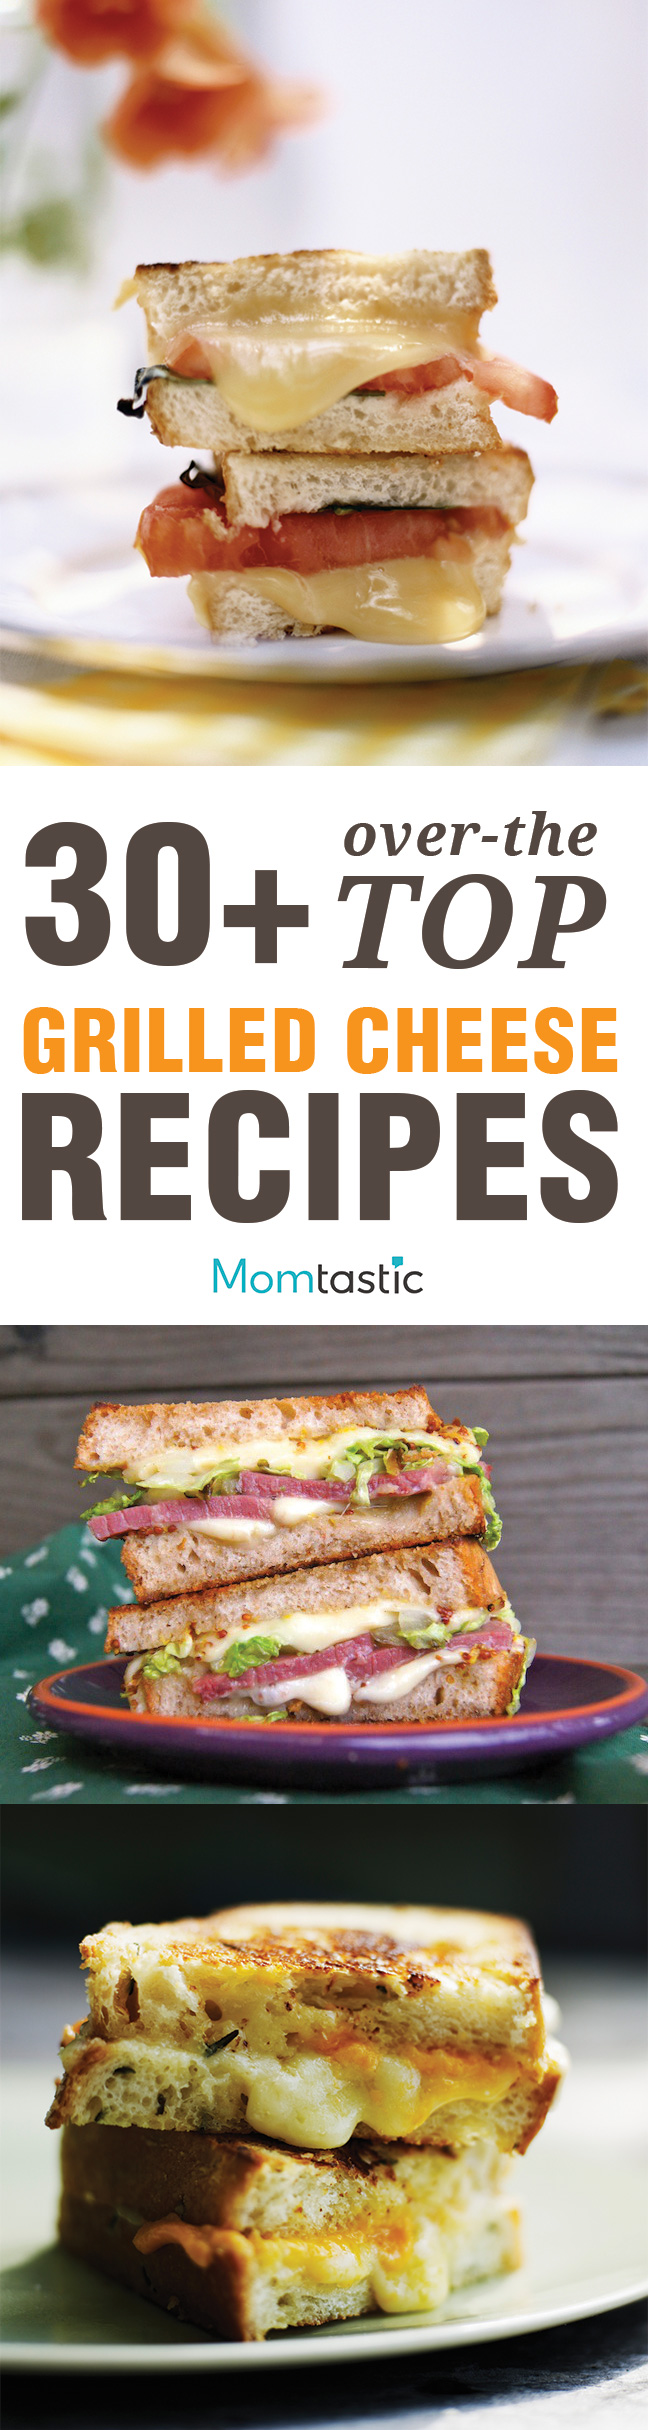 30+ Ways to Make Grilled Cheese